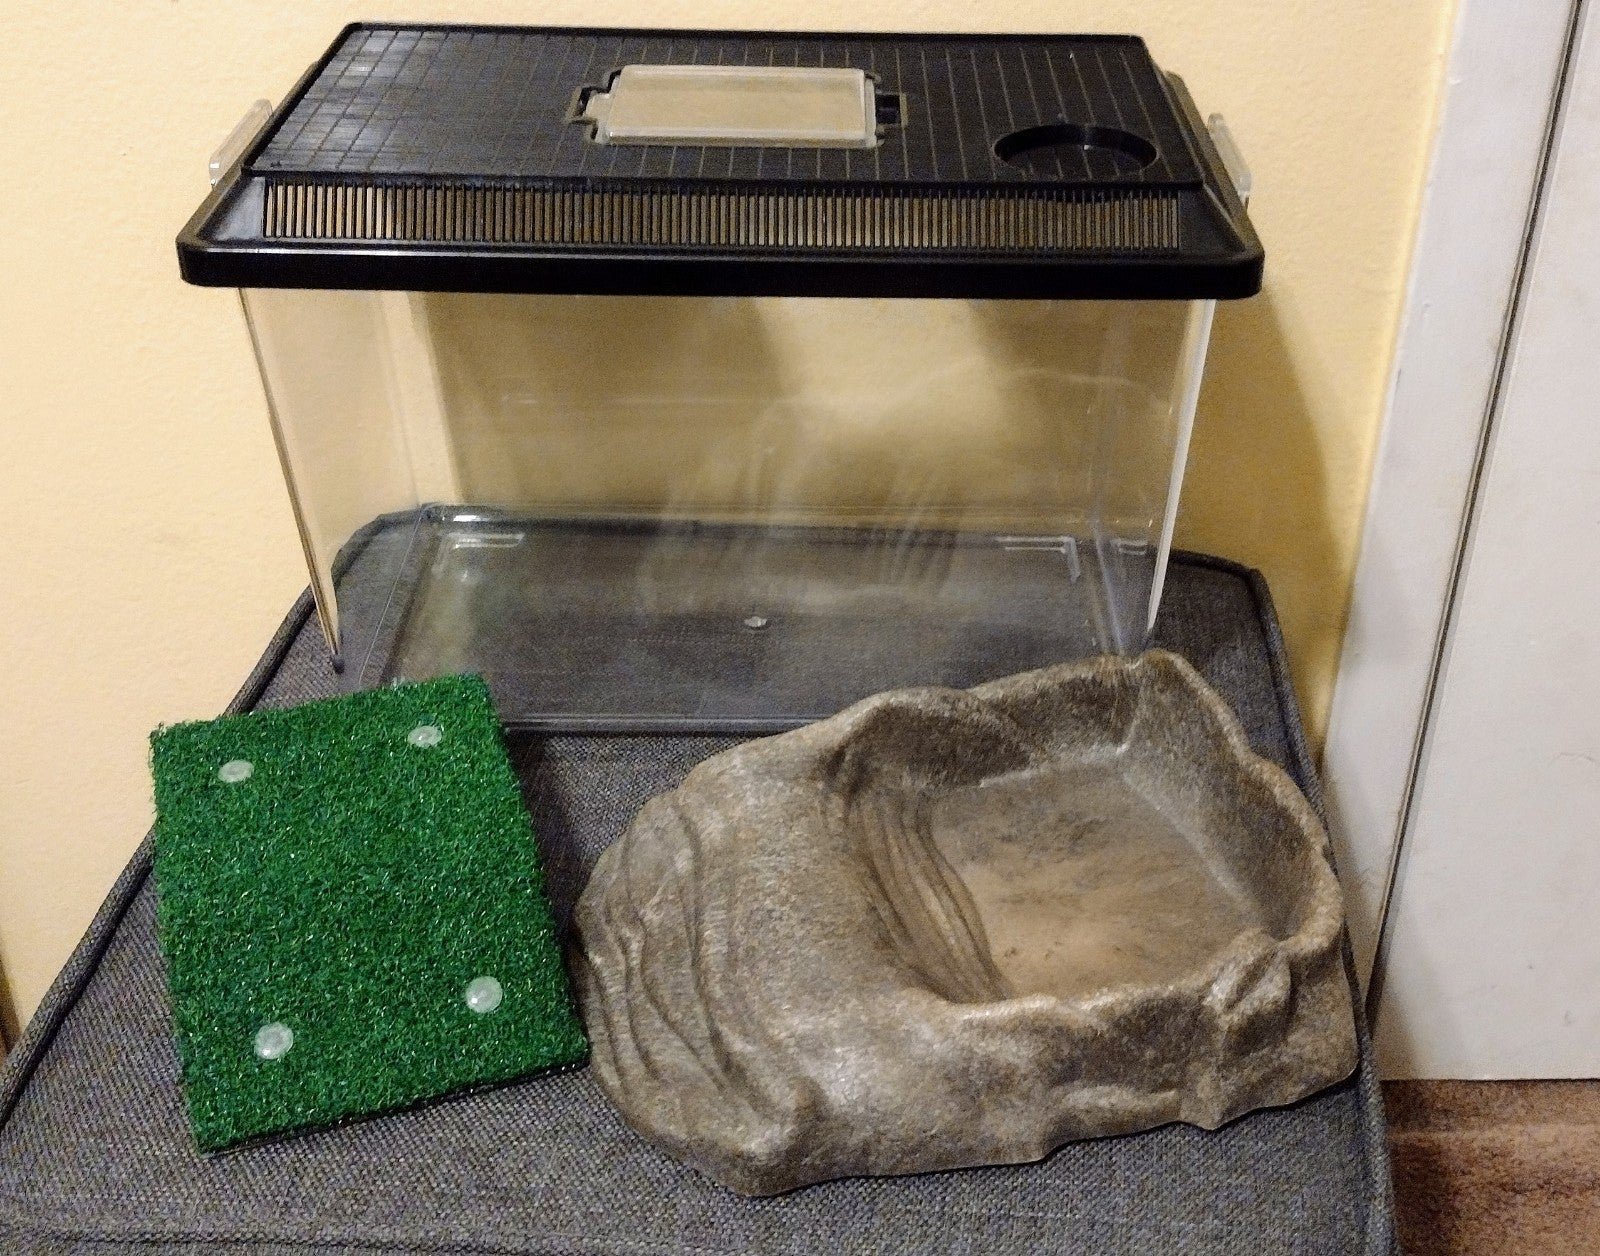 Reptile supplies and accessories; tank water dish and ramp 6E0zCxLpM